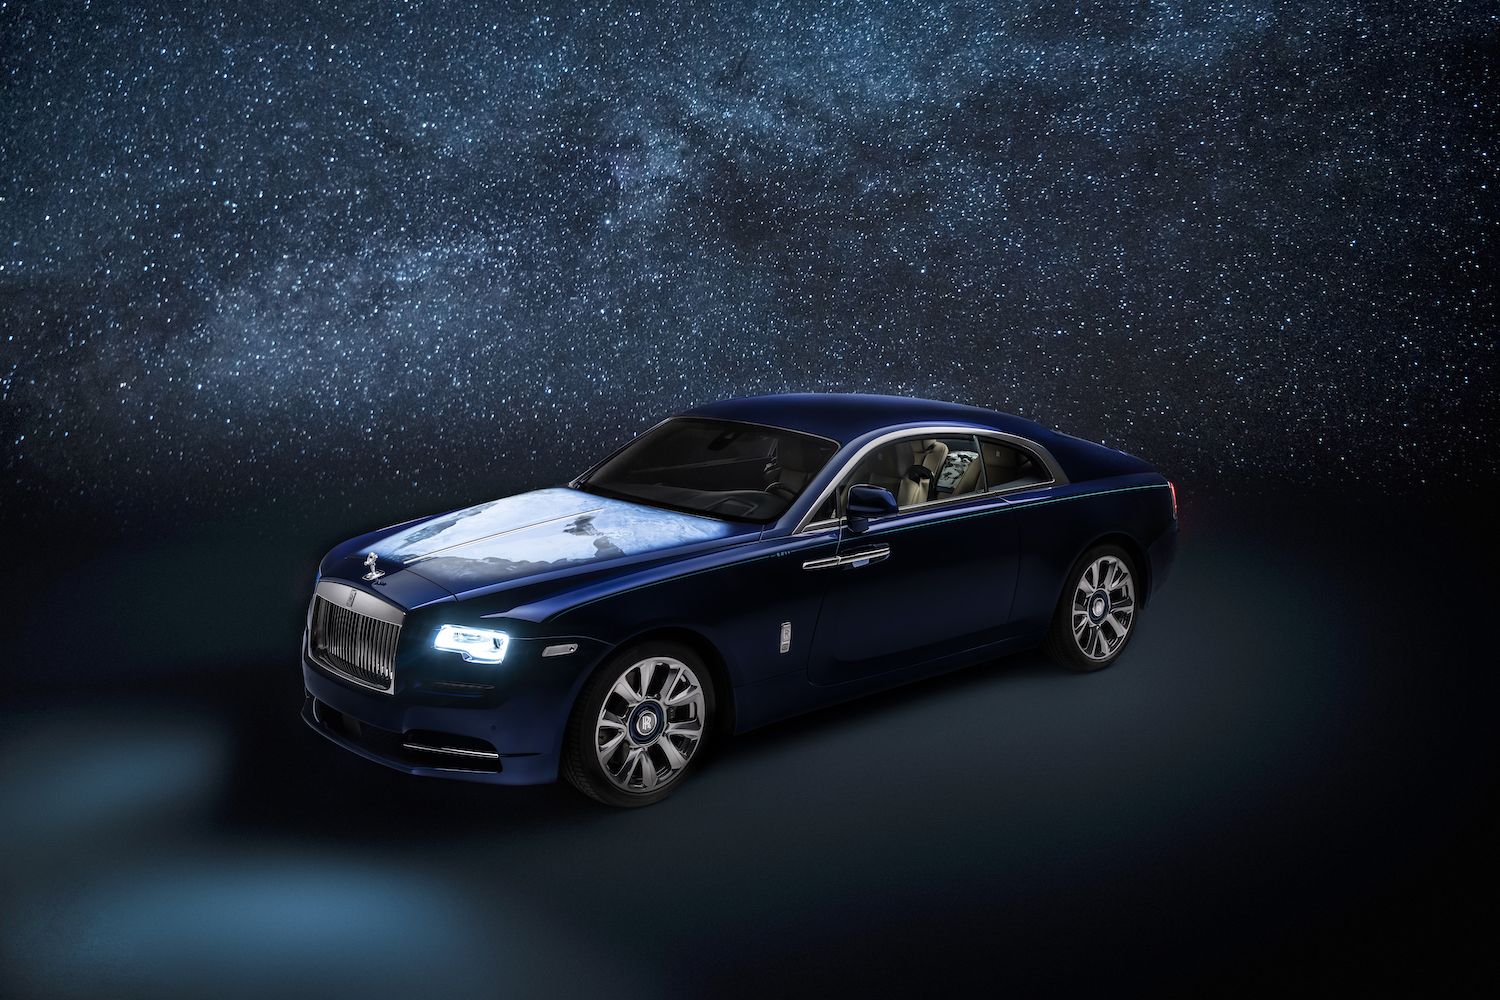 Used 2016 RollsRoyce Wraith Coupe MSRP 352200 STARLIGHT HEADLINER For  Sale Special Pricing  Chicago Motor Cars Stock 17369